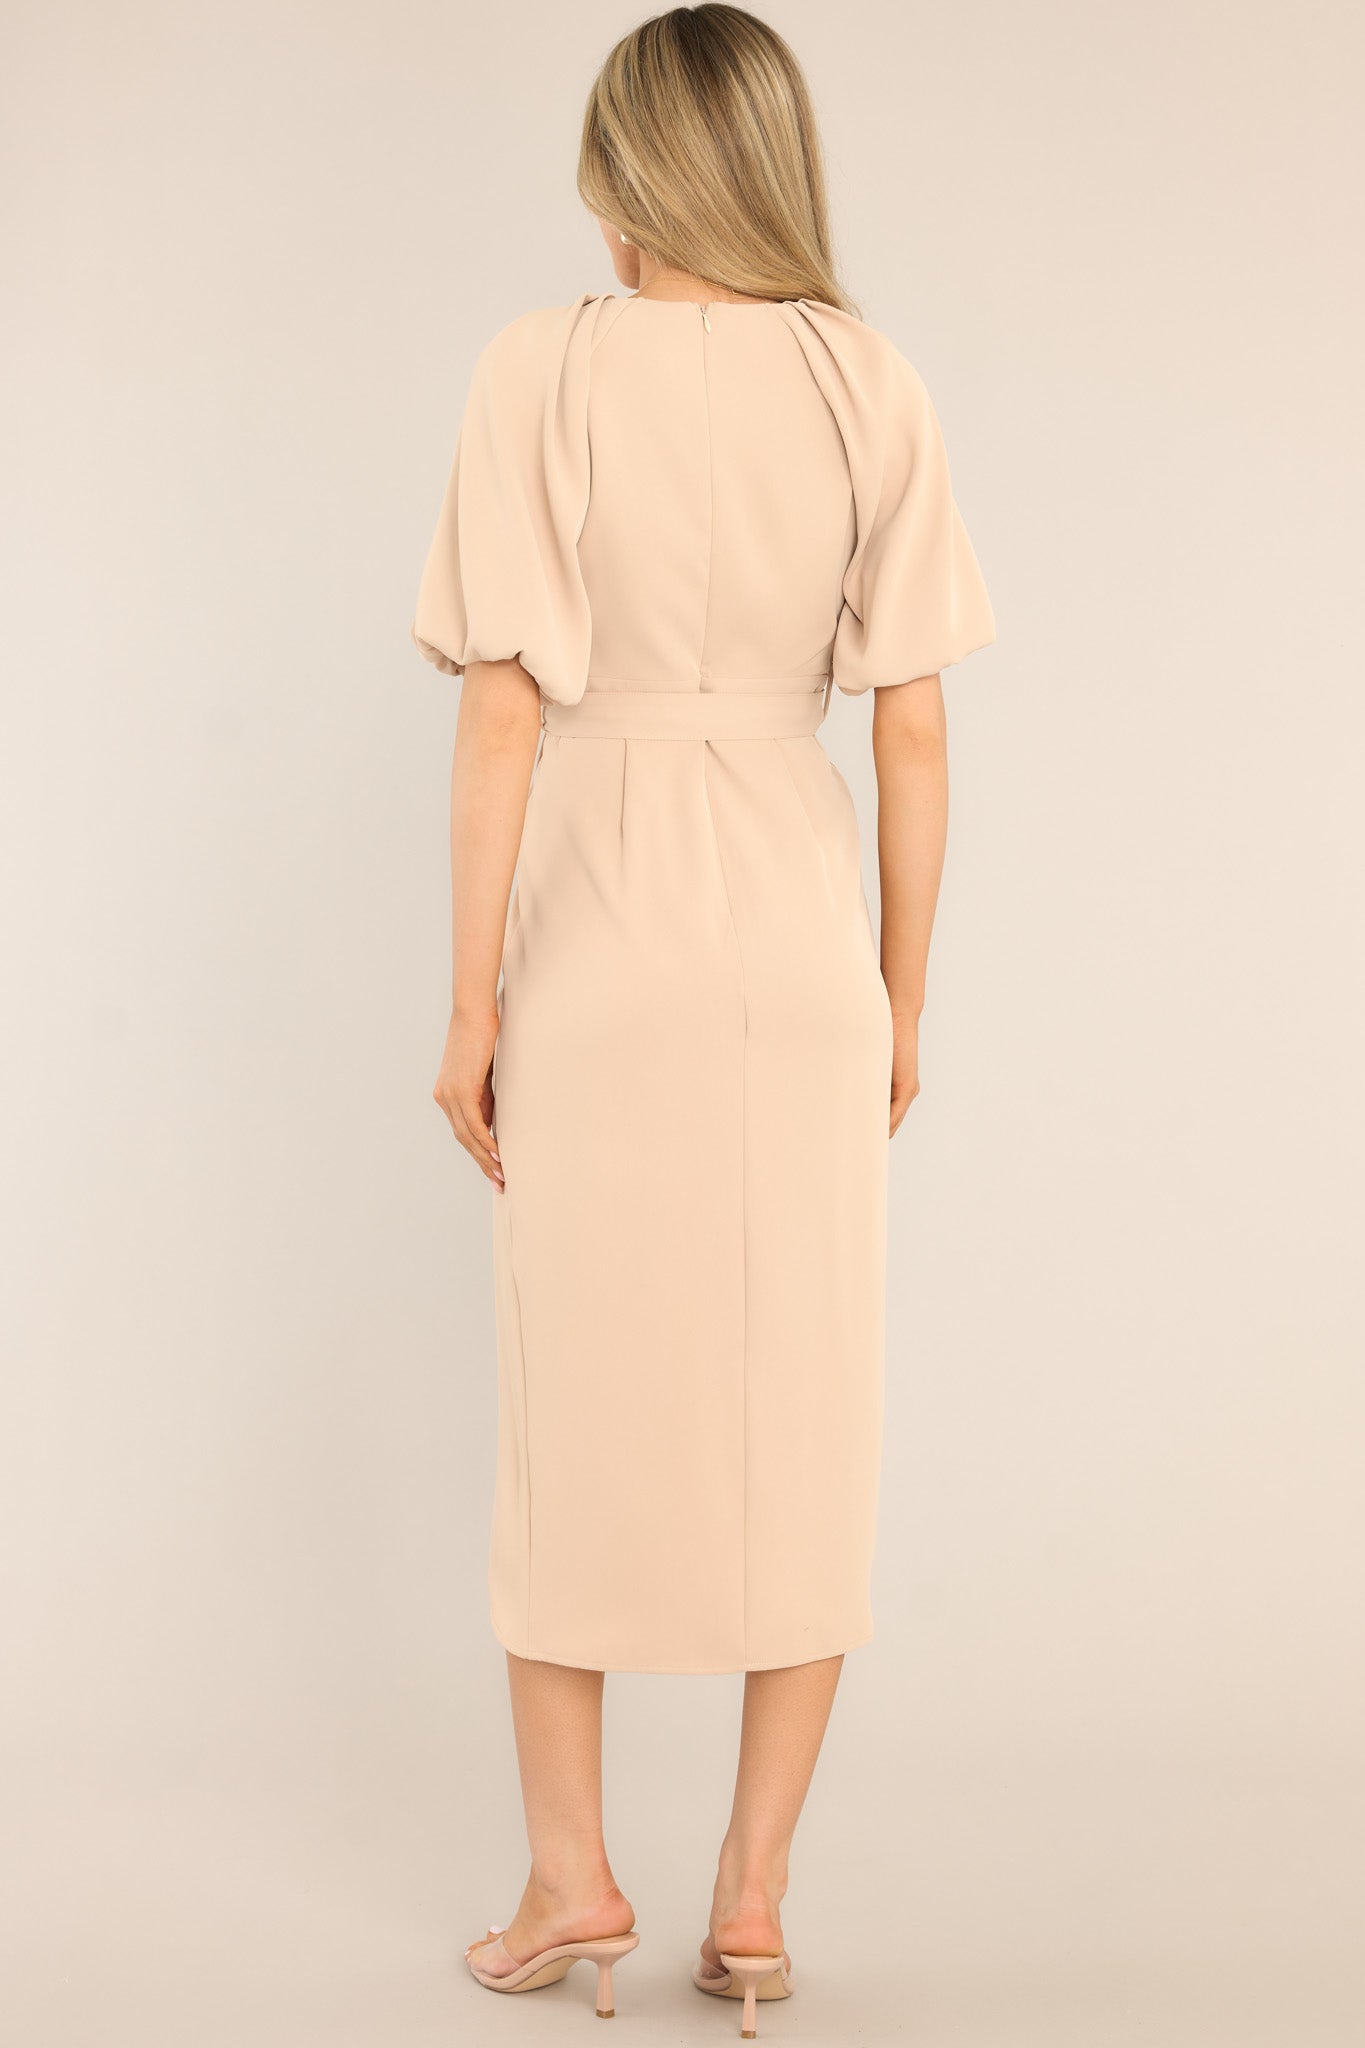 Back view of this dress that features a v-neckline, a zipper down the back, belt loops, a functional belt, an asymmetrical hemline, and elastic cuffed sleeves.